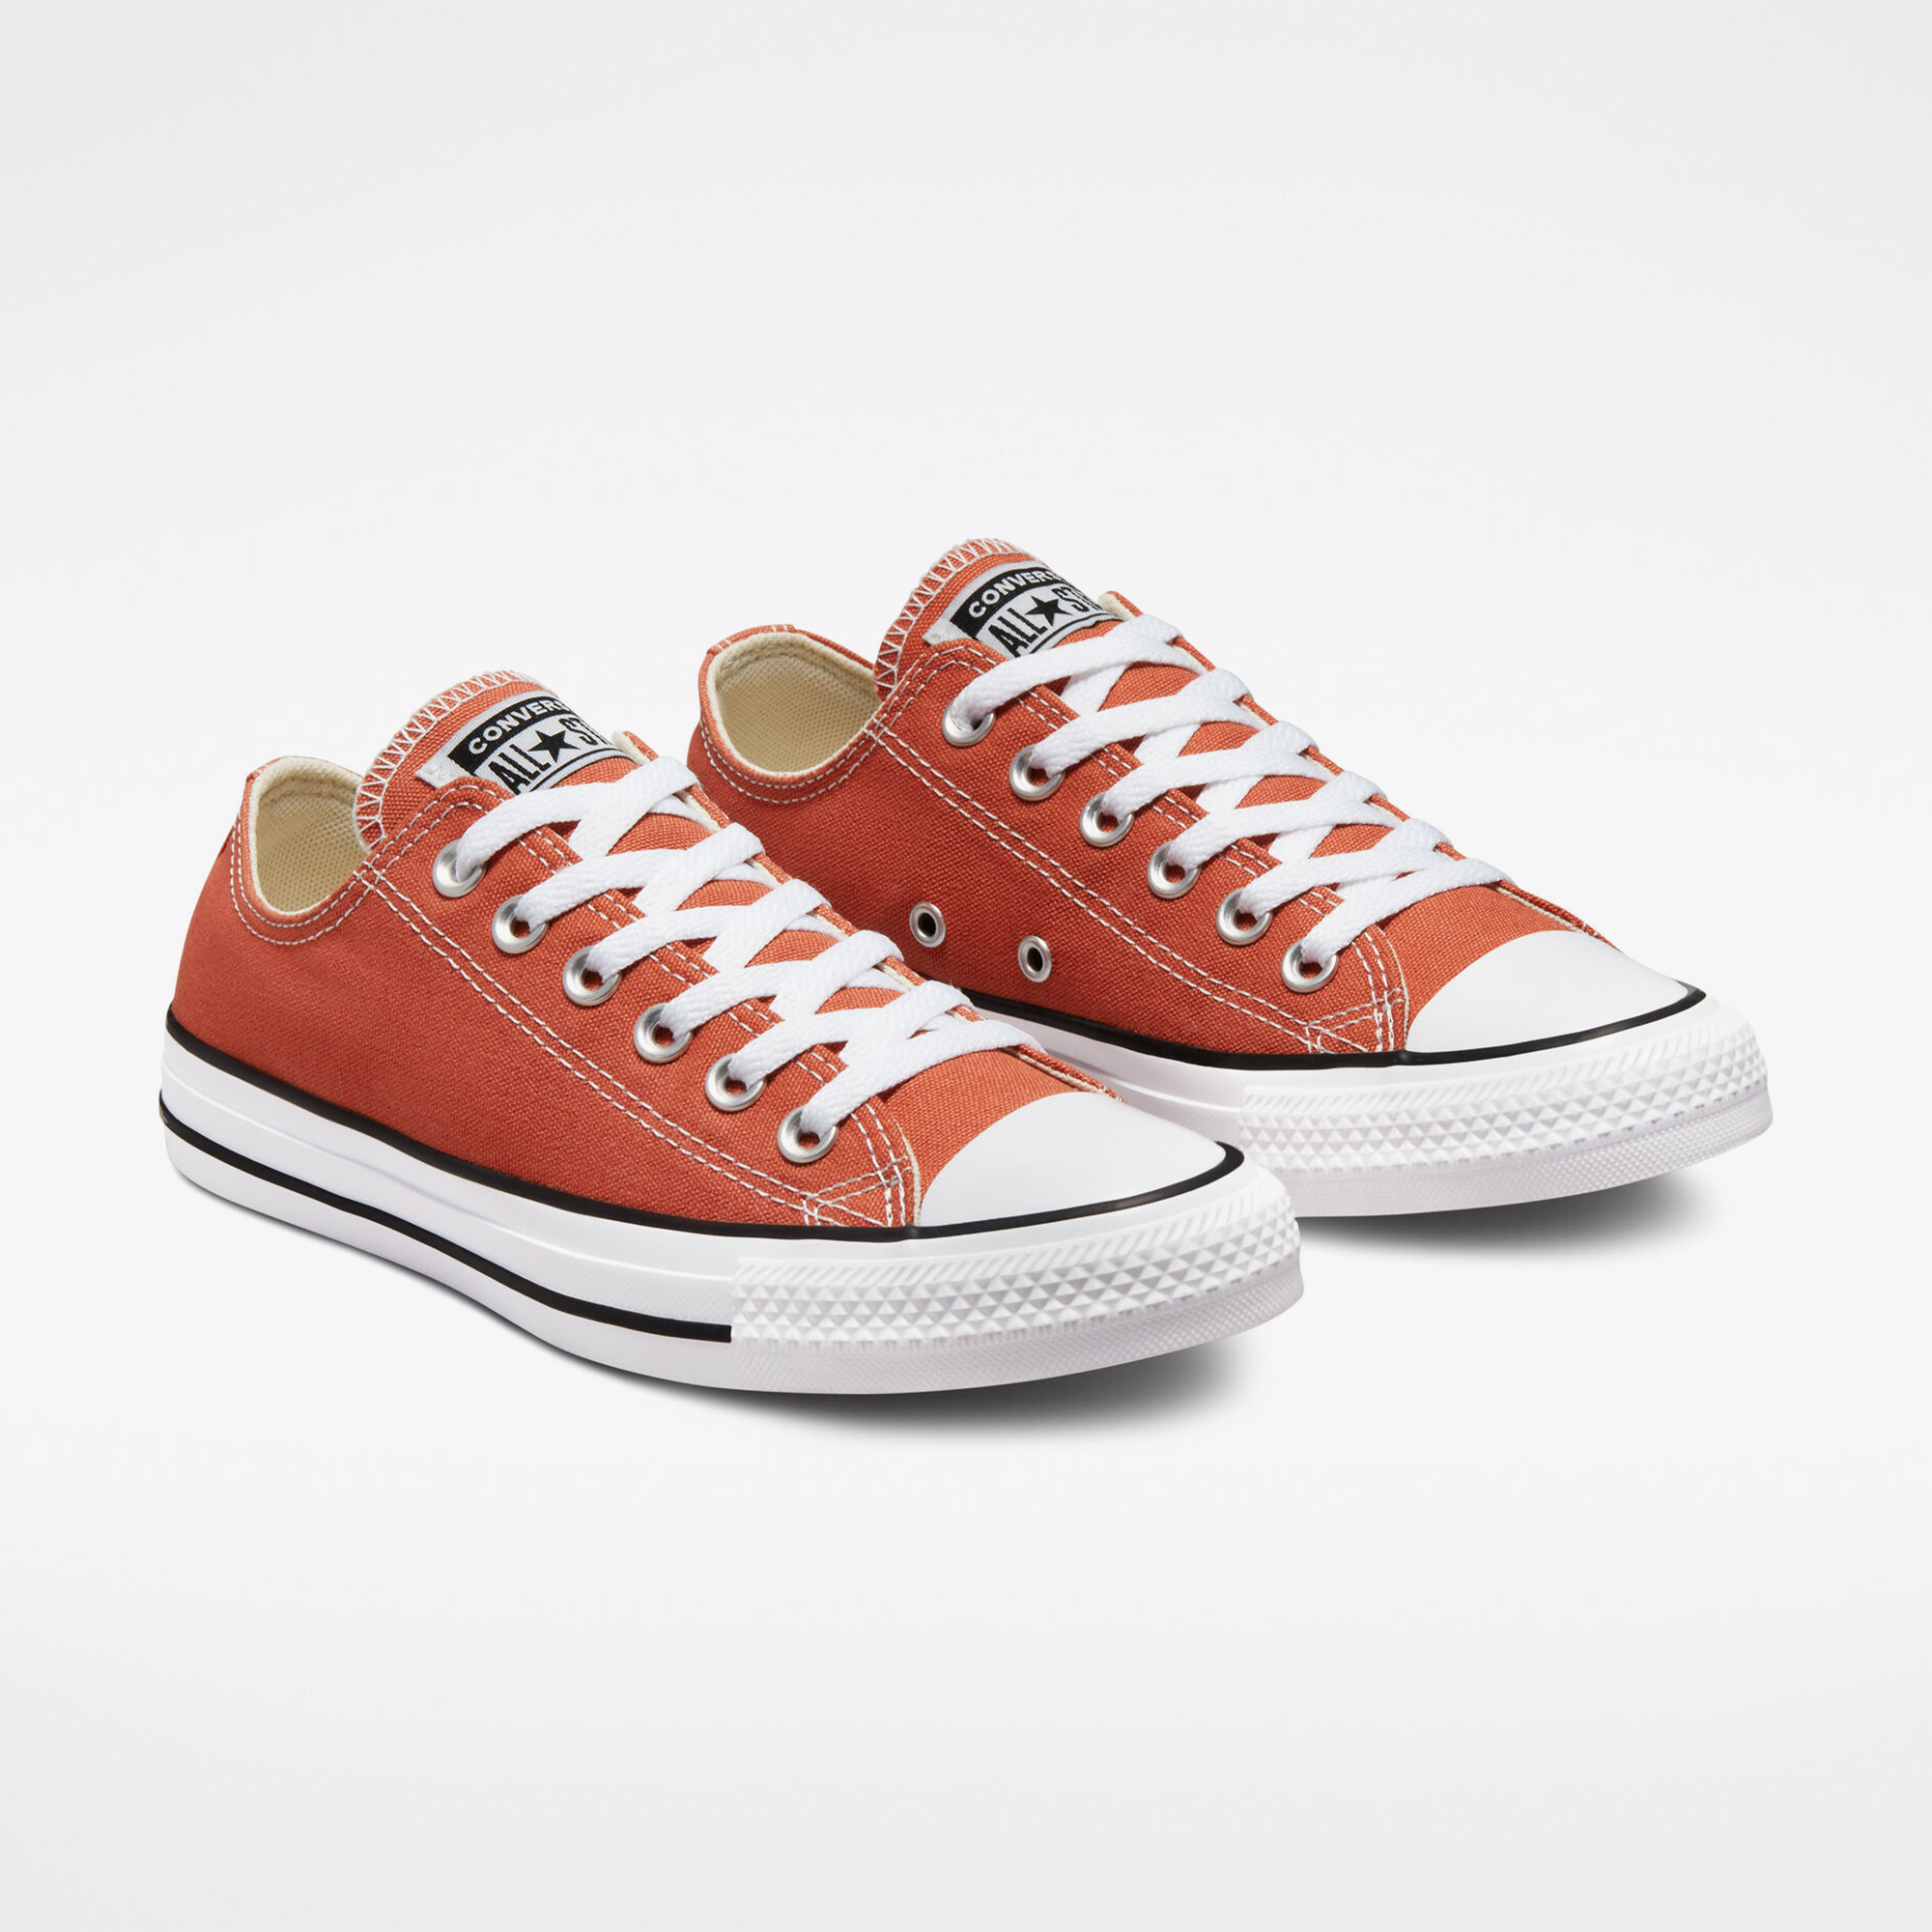 Converse Chuck Taylor All Star 50/50 Recycled Cotton Unisex Turuncu Sneaker